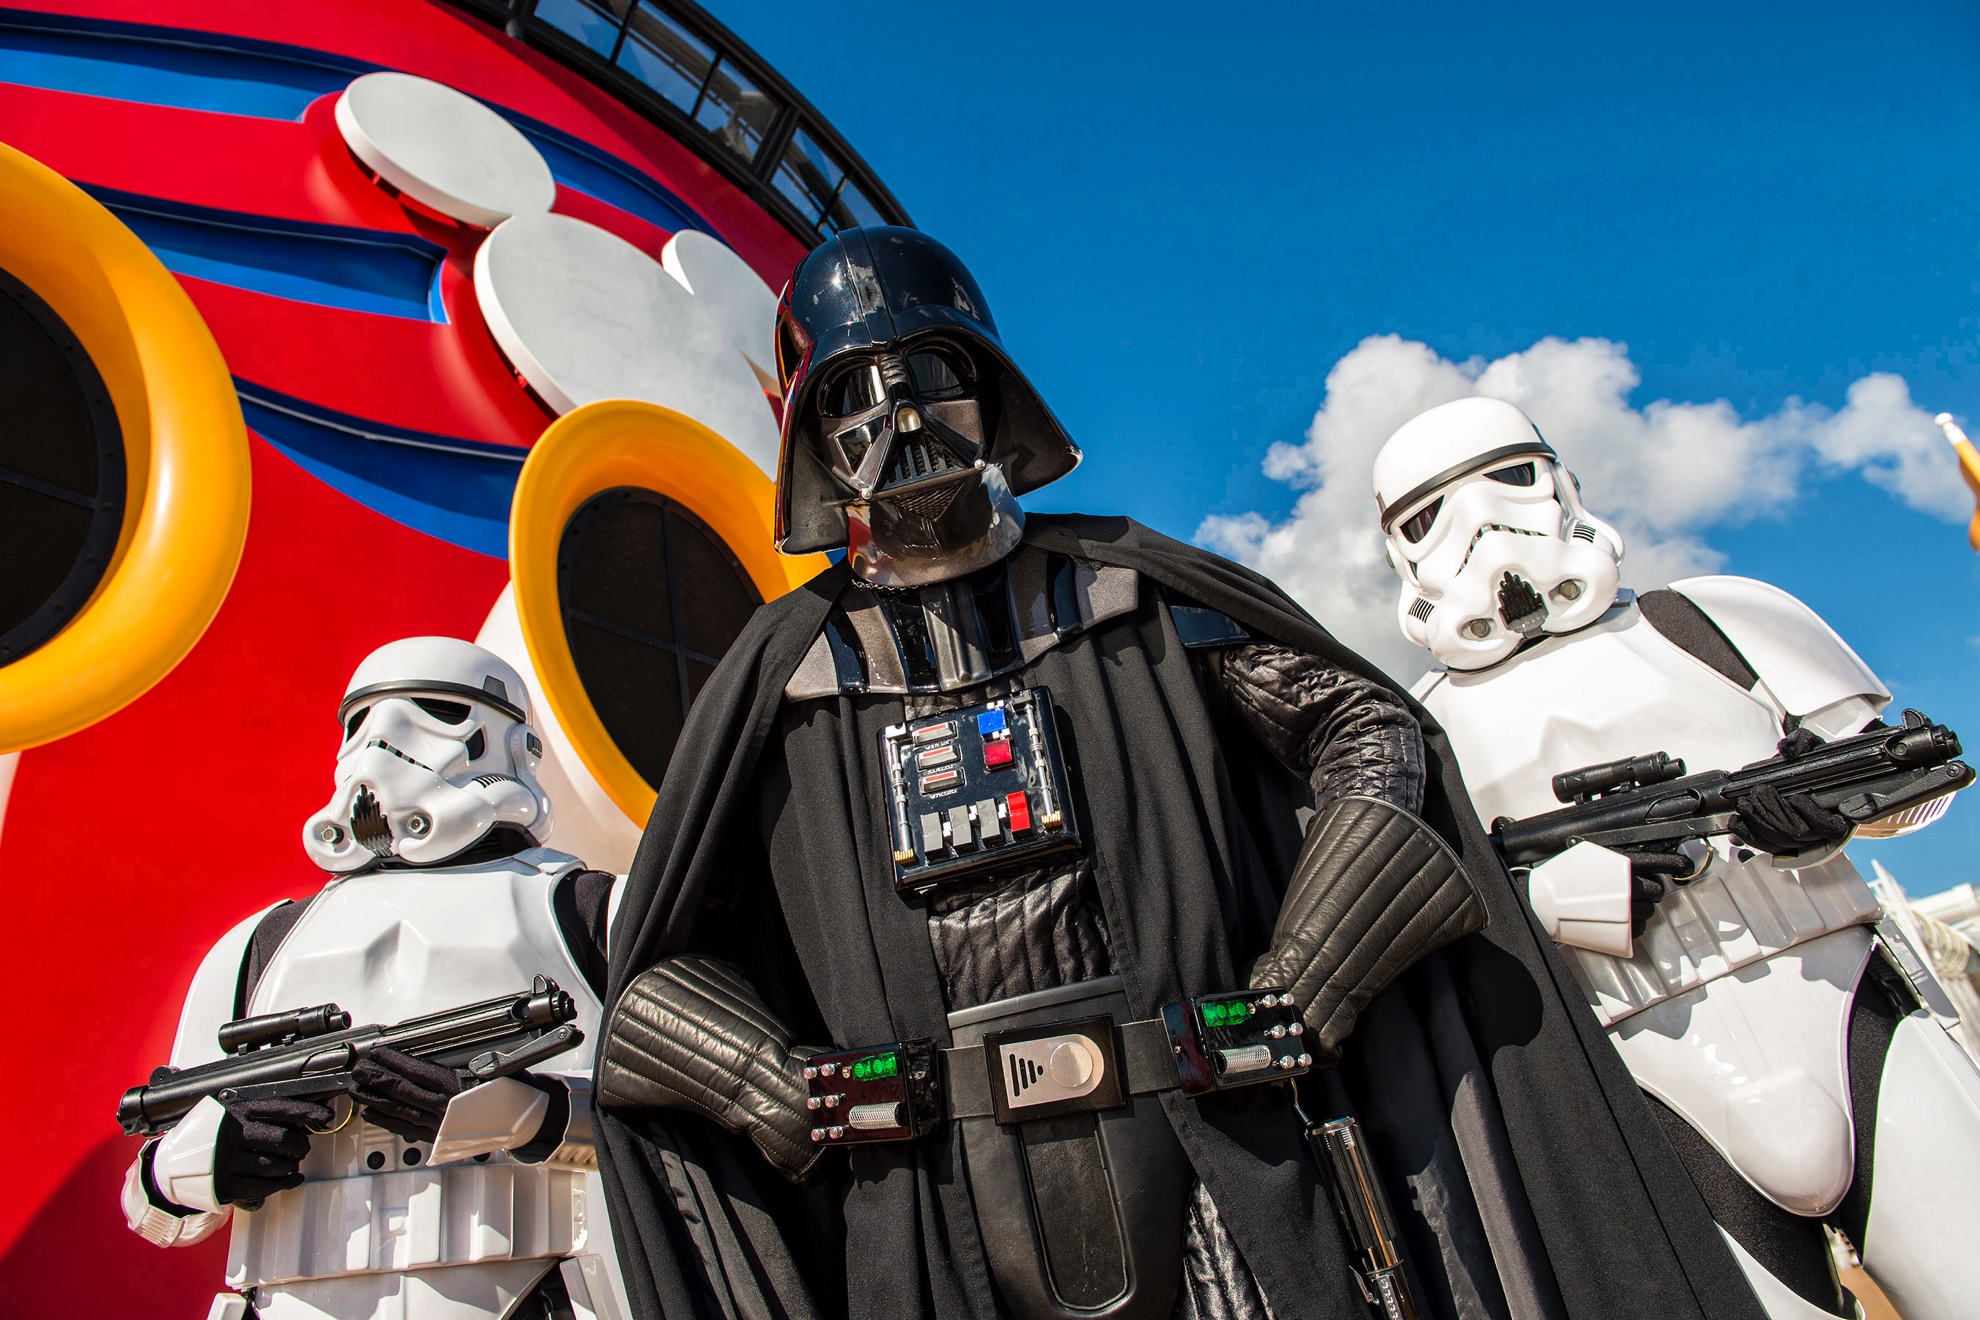 Star Wars Day at Sea Returns to Disney Cruise Line in 2021